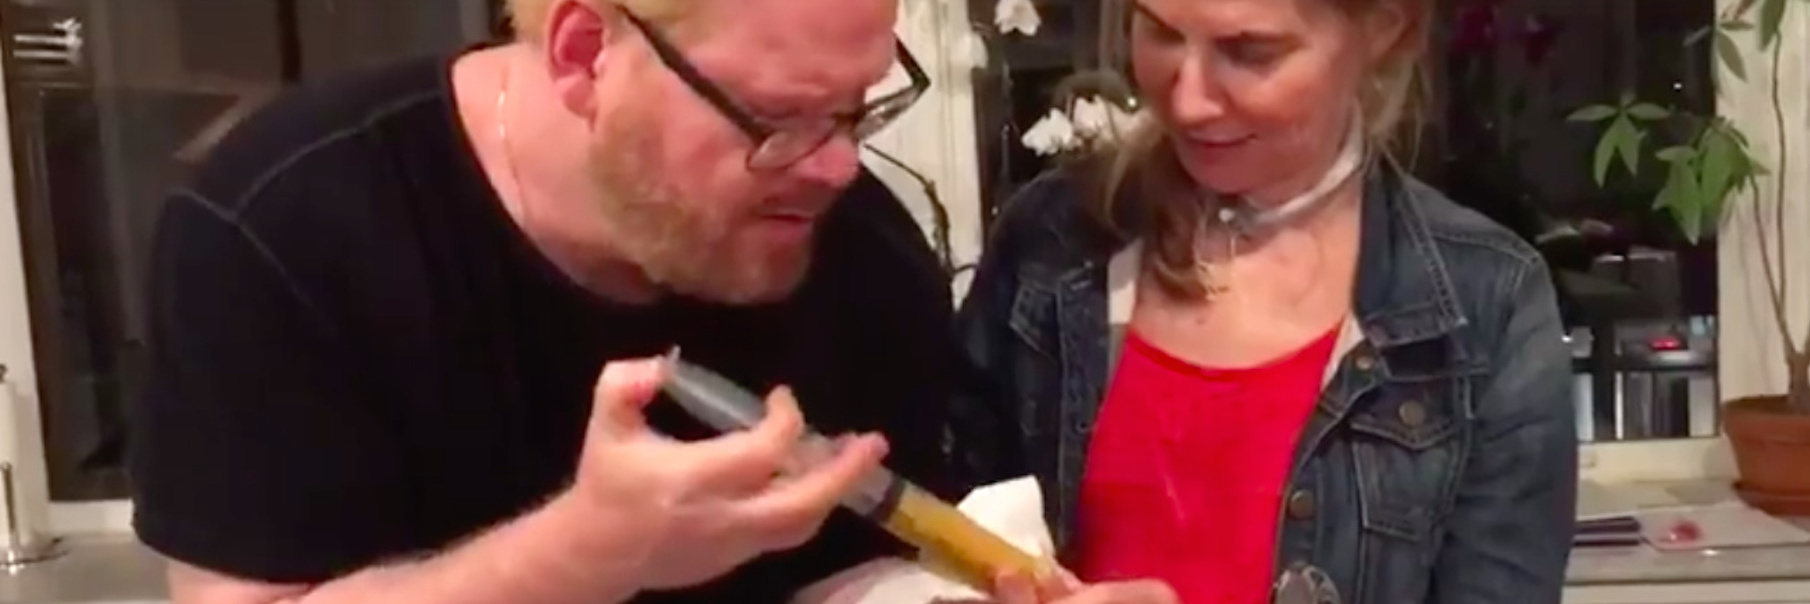 jim gaffigan using a syringe to inject his wife jeannie's feeding tube